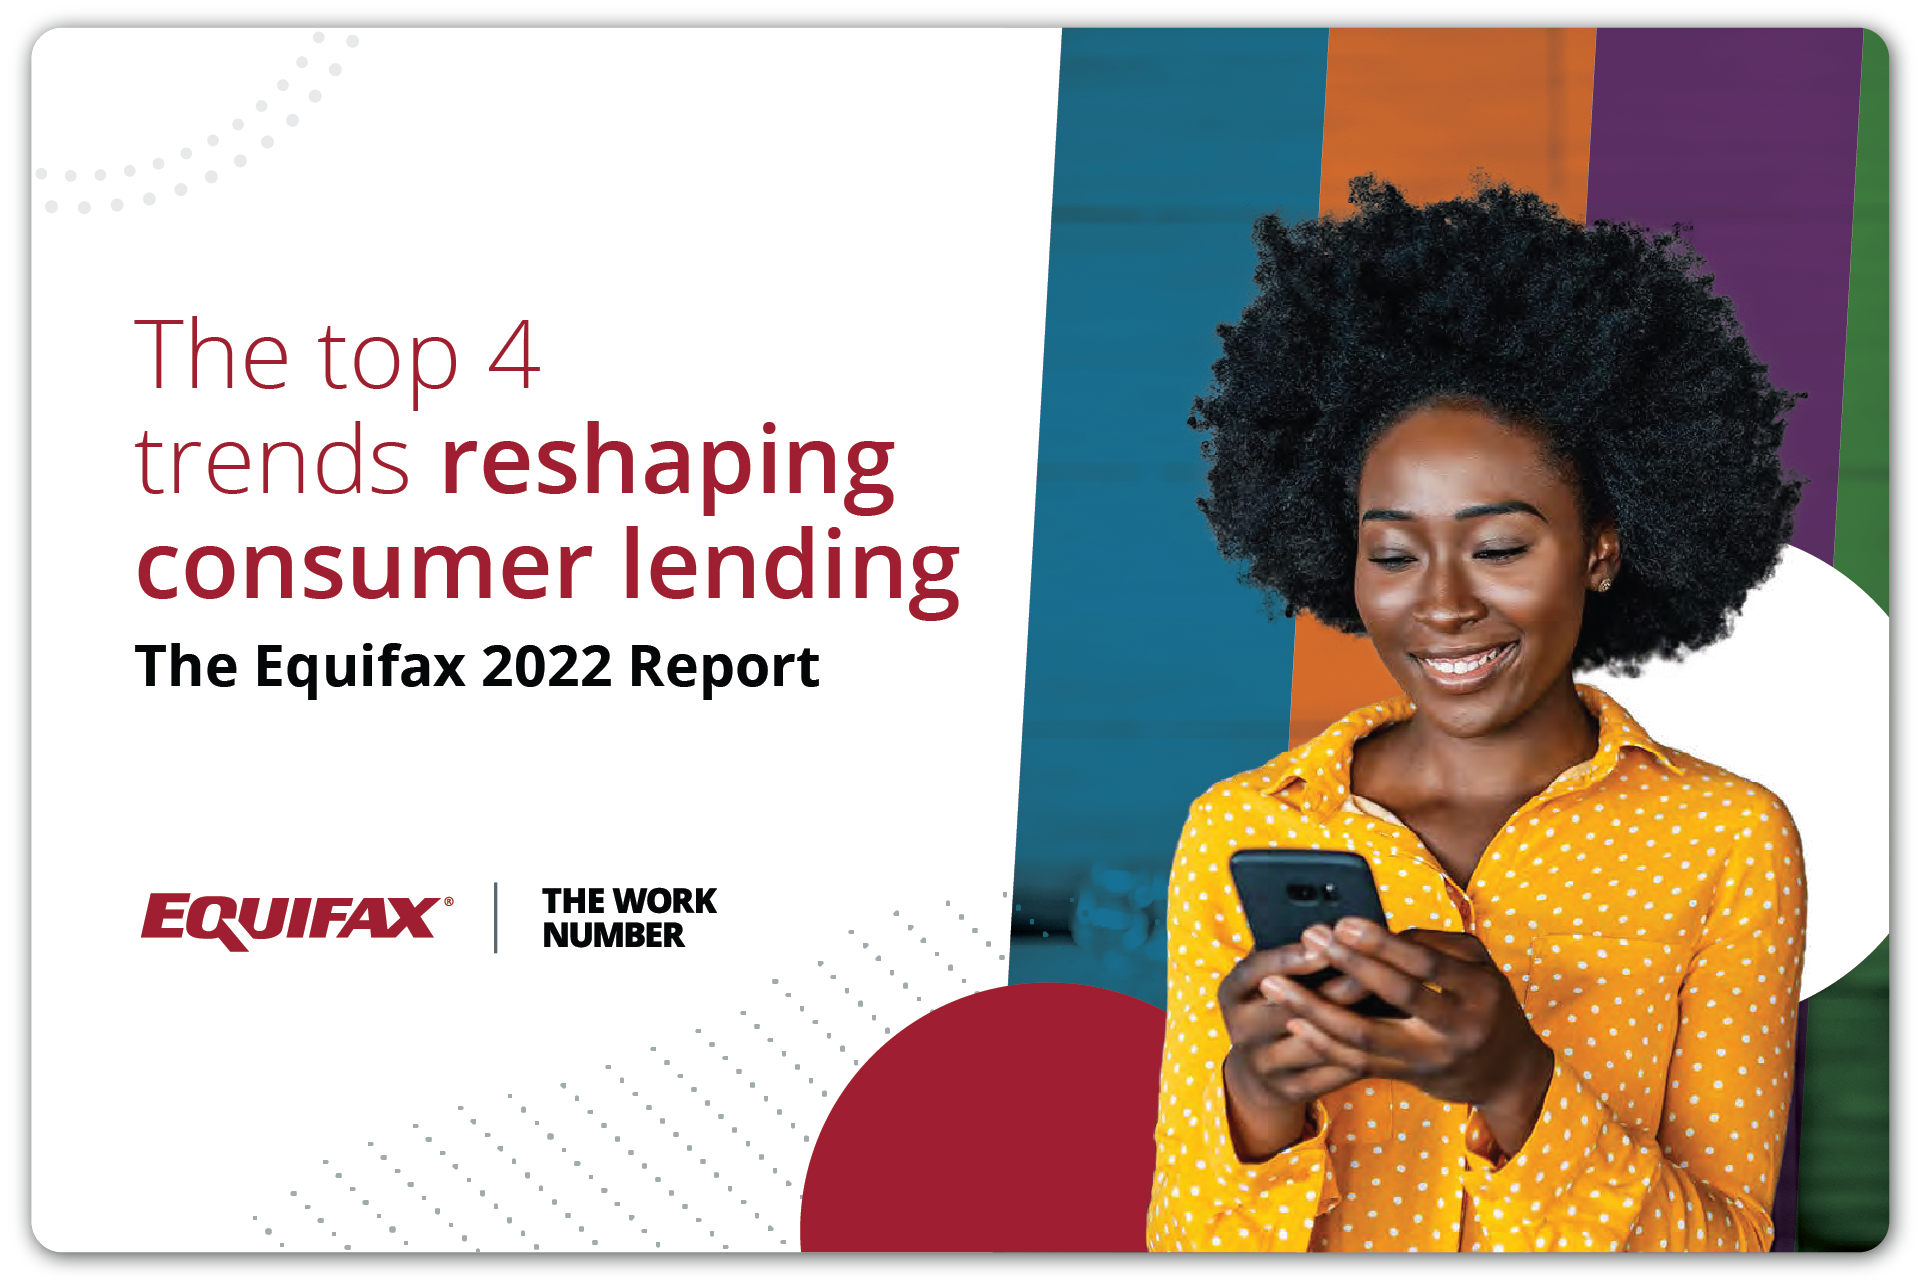 The Top 4 Trends Reshaping Consumer Lending Image